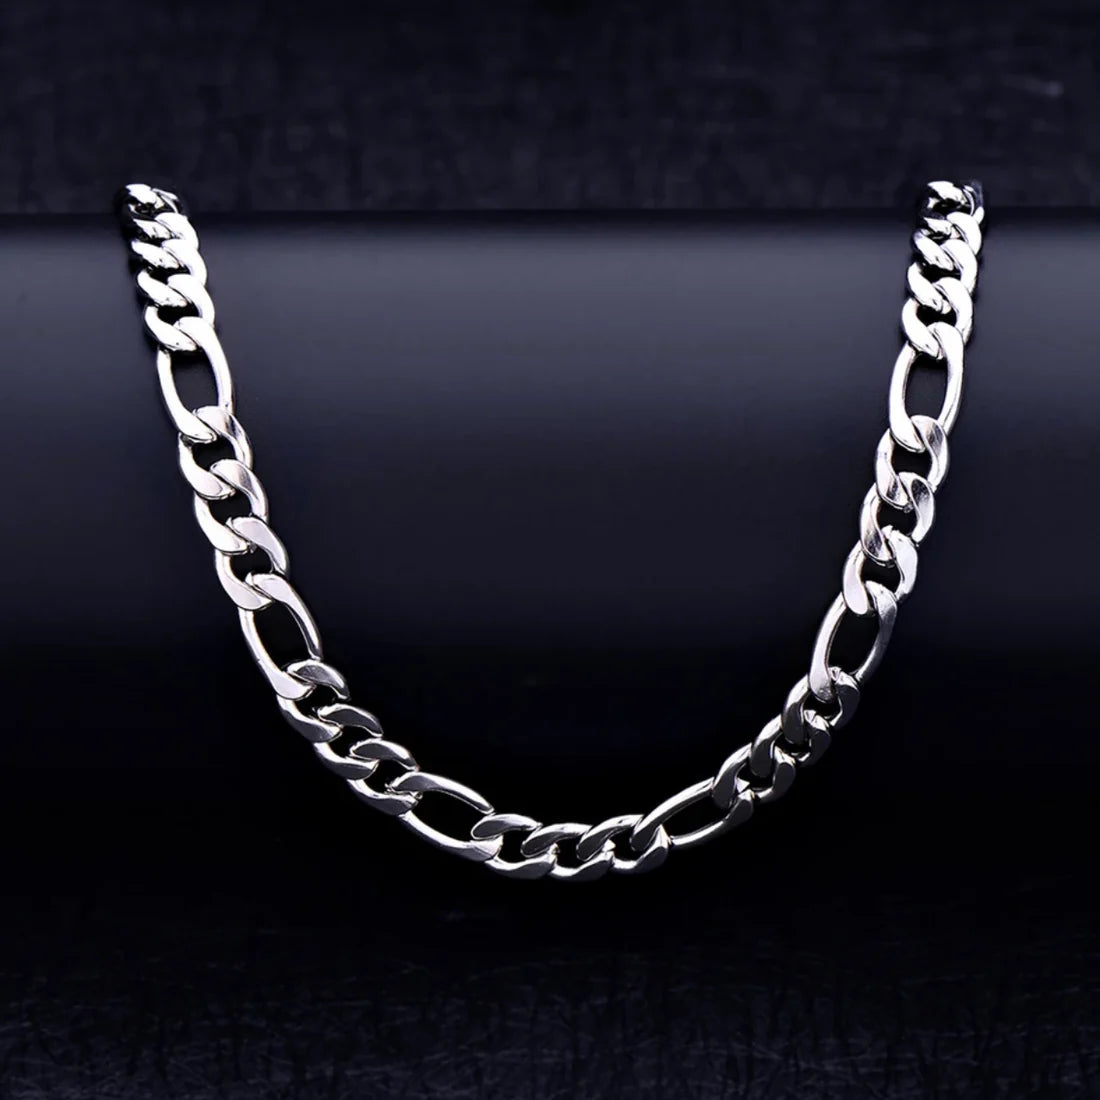 11mm Short Silver Figaro Link Neck Chain